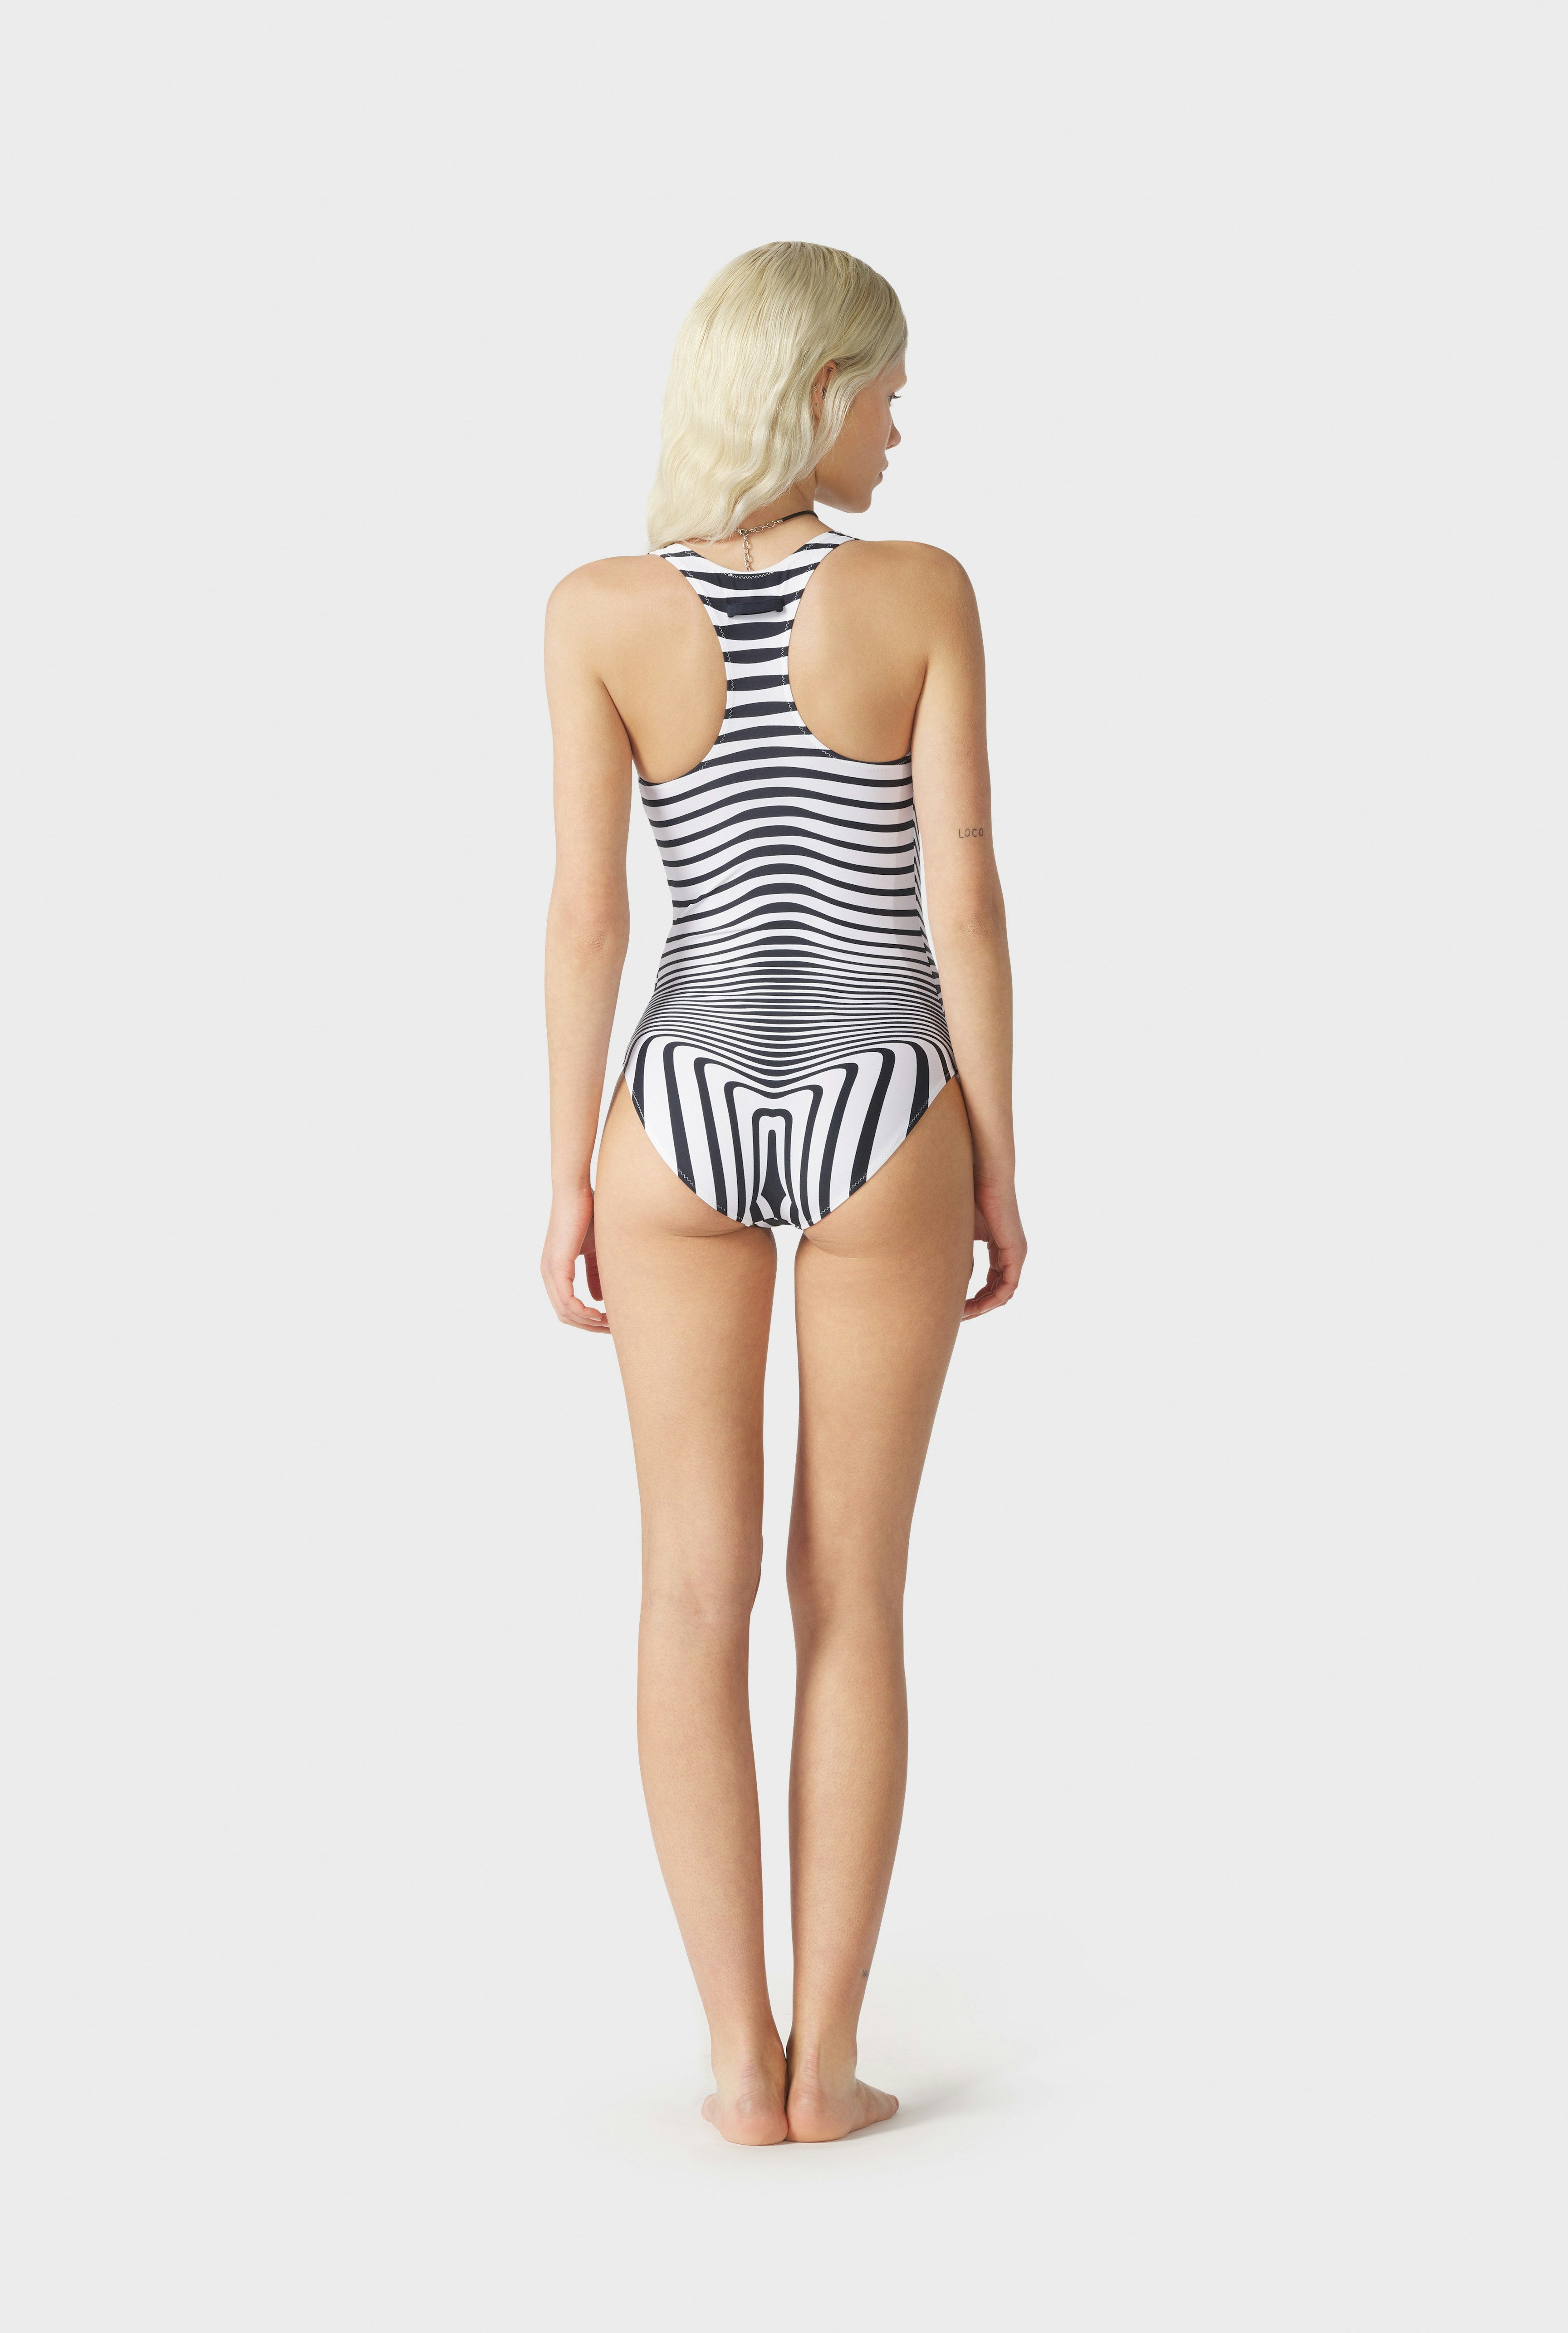 The Navy Blue Body Morphing Swimsuit